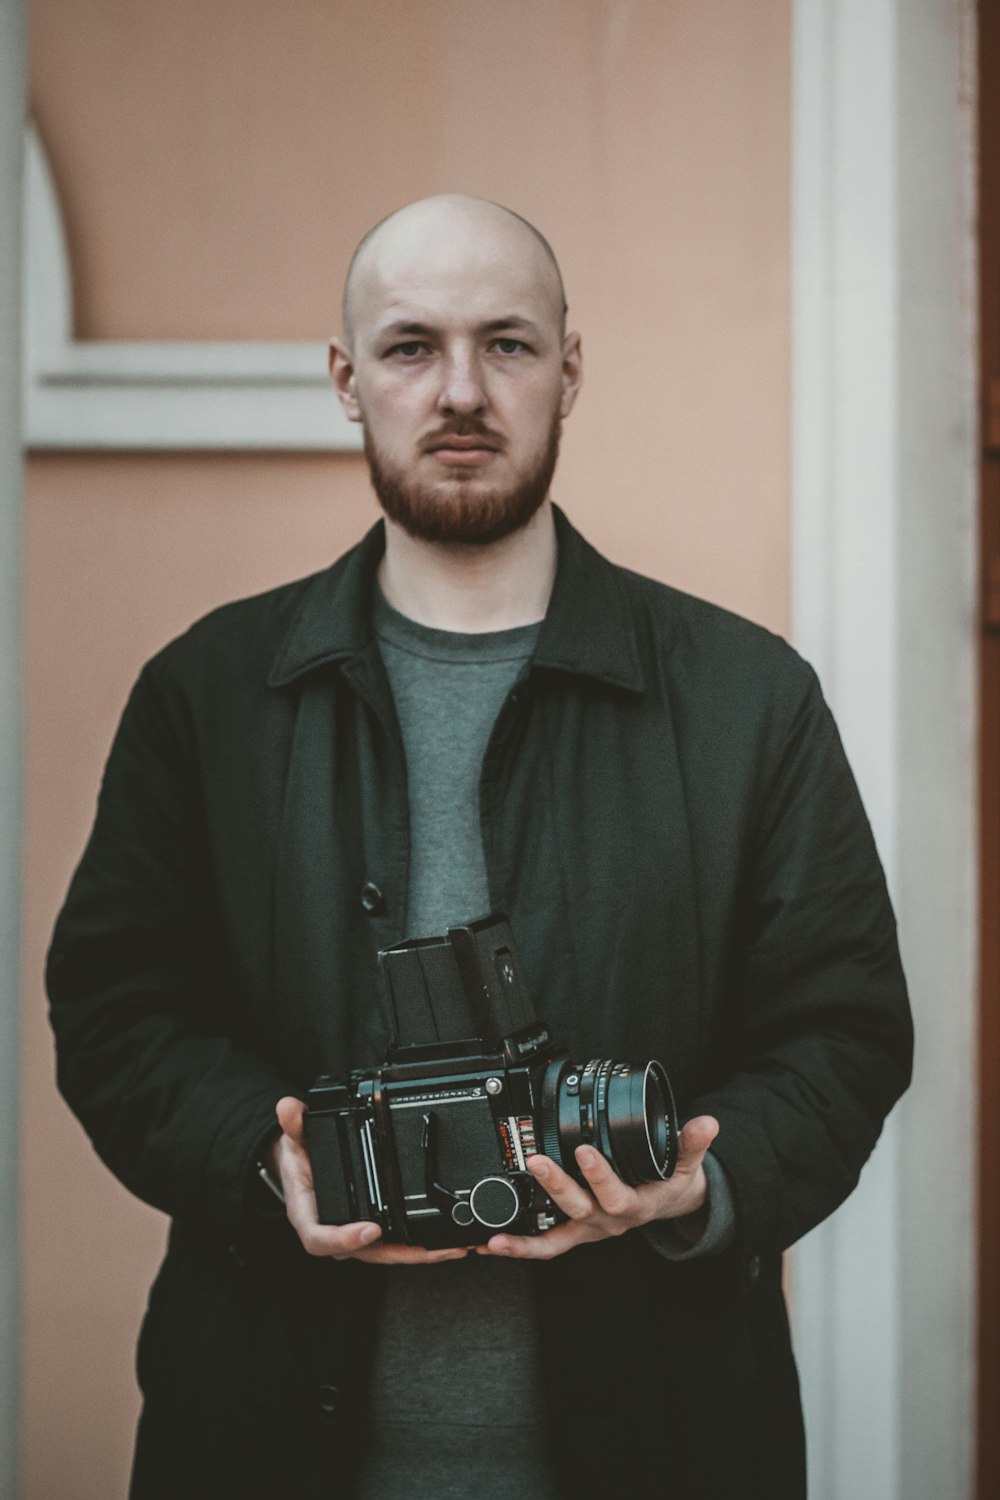 a man with a bald head holding a camera